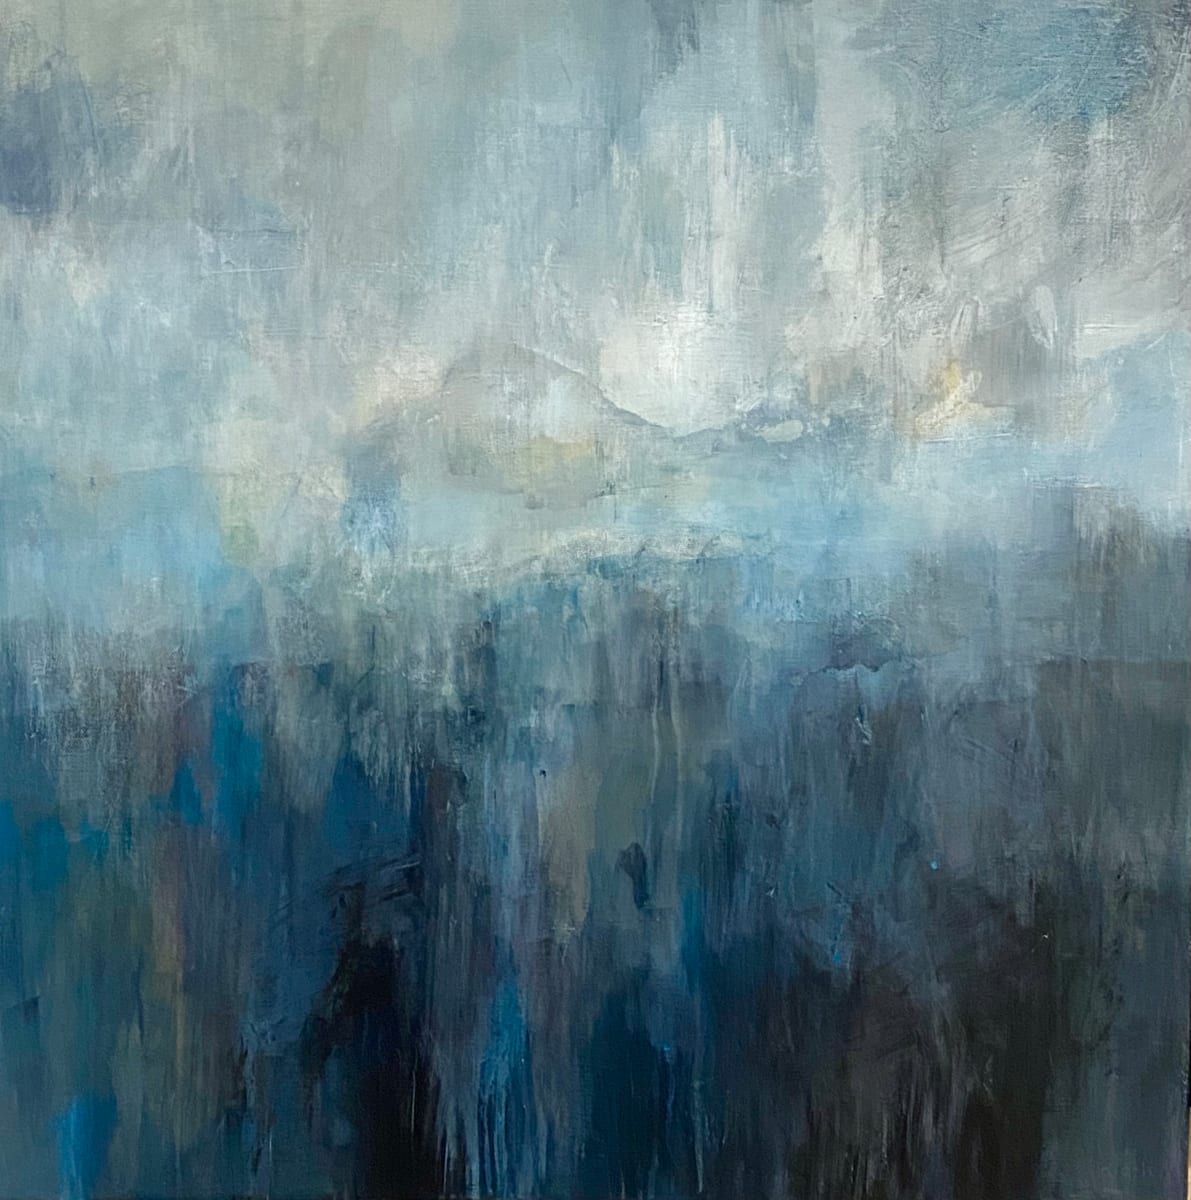 Aeterna by Jo York  Image: Aeterna: about the special light and atmosphere of an intensely quiet and misty morning.